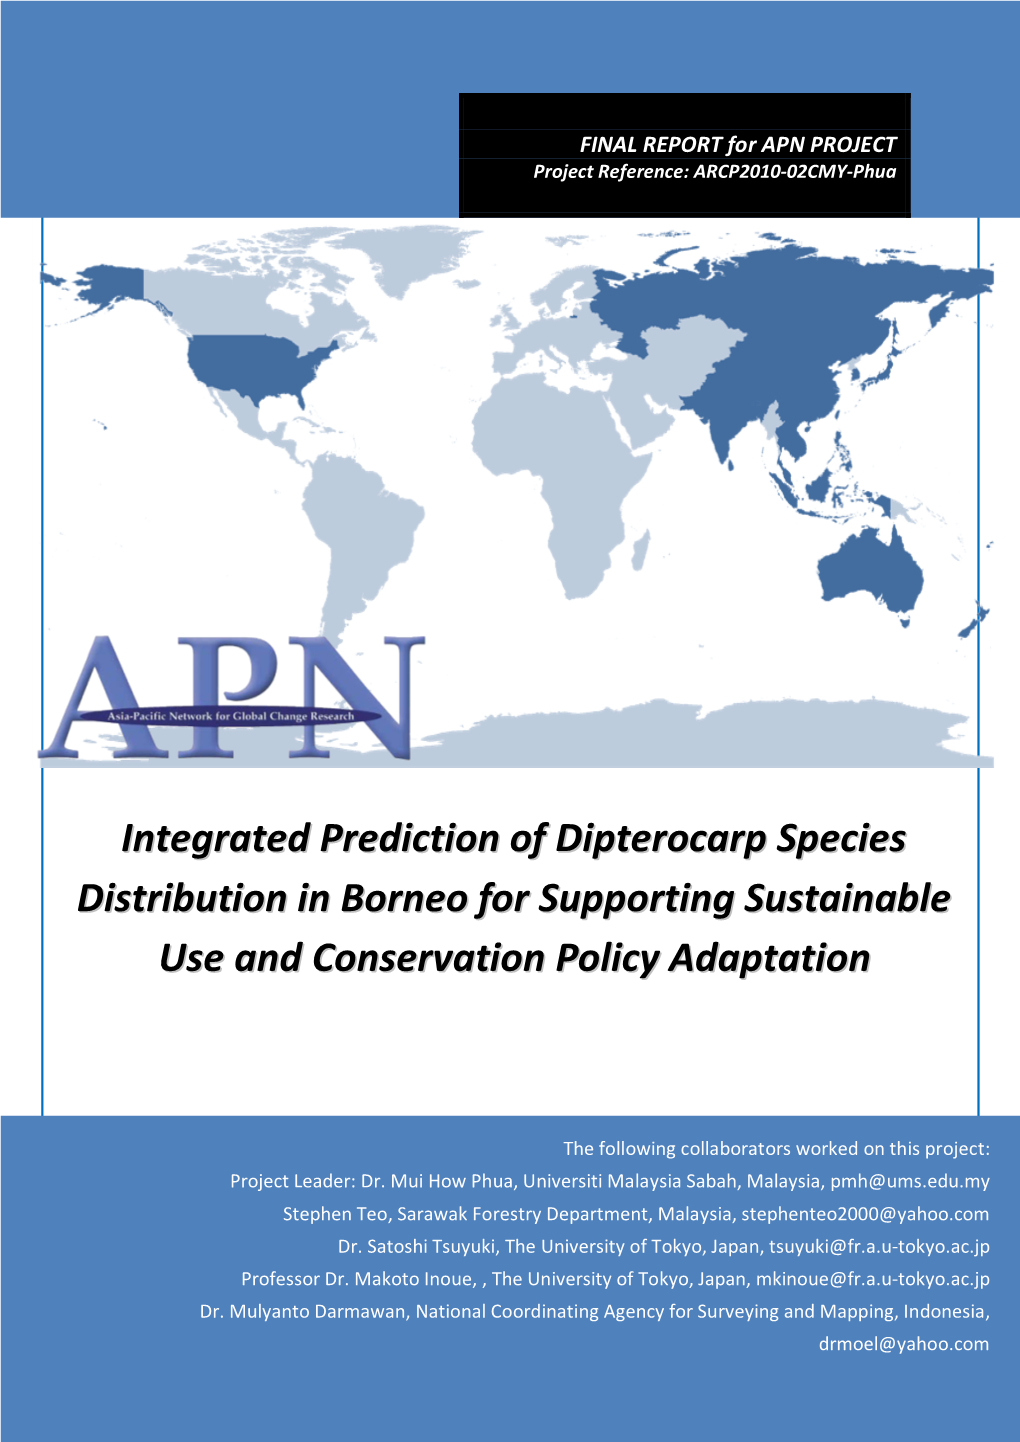 Integrated Prediction of Dipterocarp Species Distribution in Borneo for Supporting Sustainable